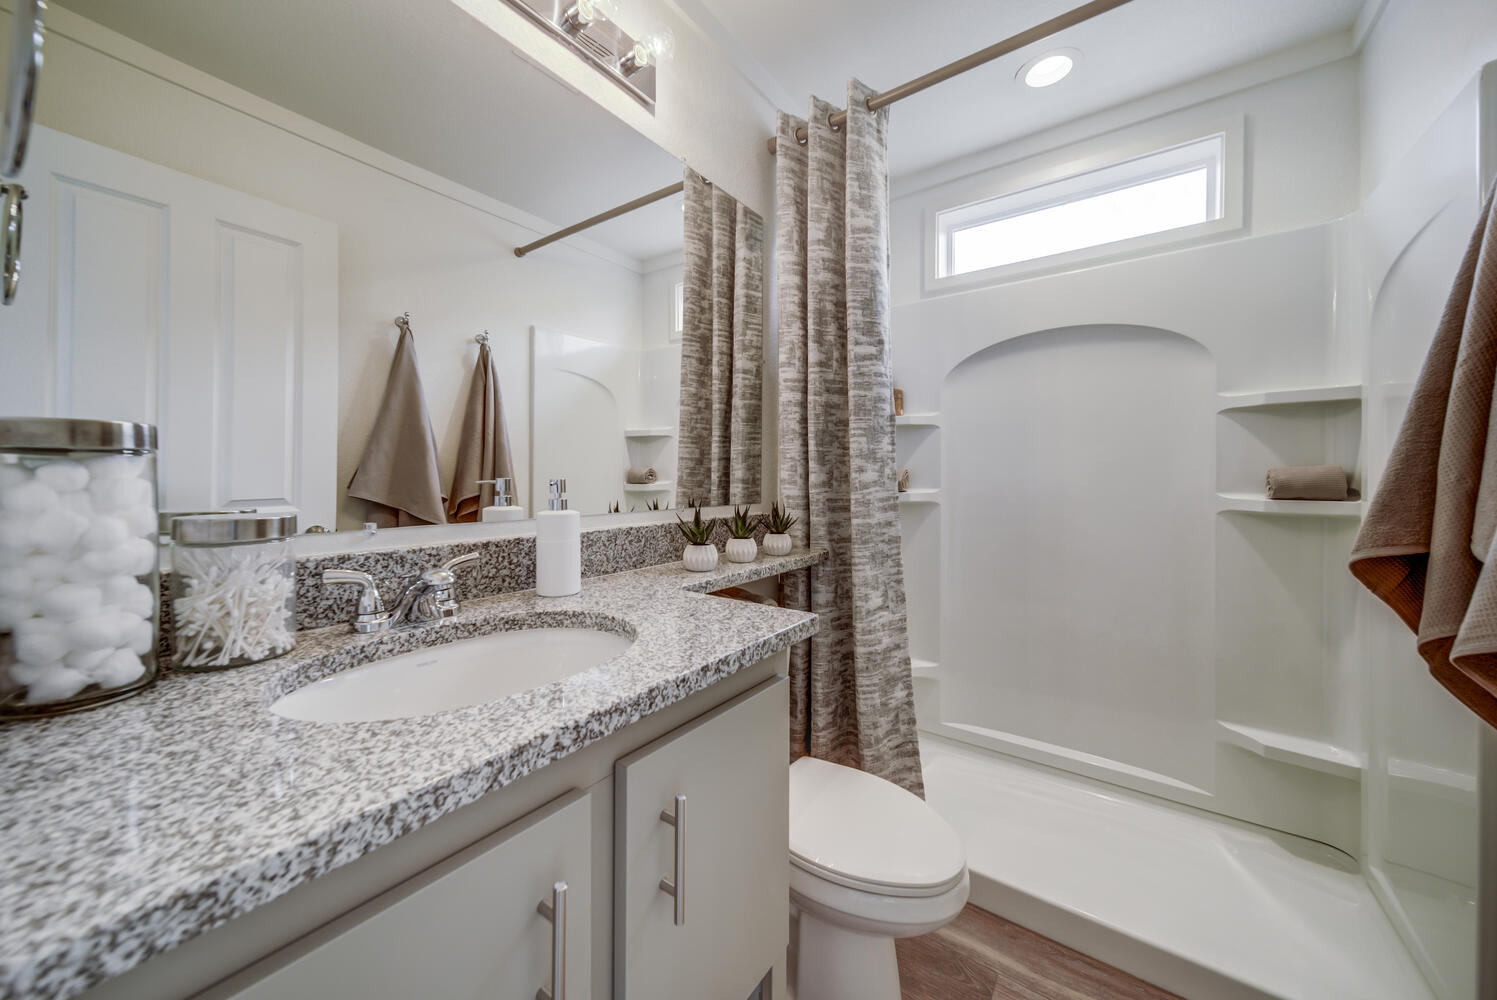 Spacious On2 bathrooms feature natural lighting, stone surfaces and beautiful fixtures.